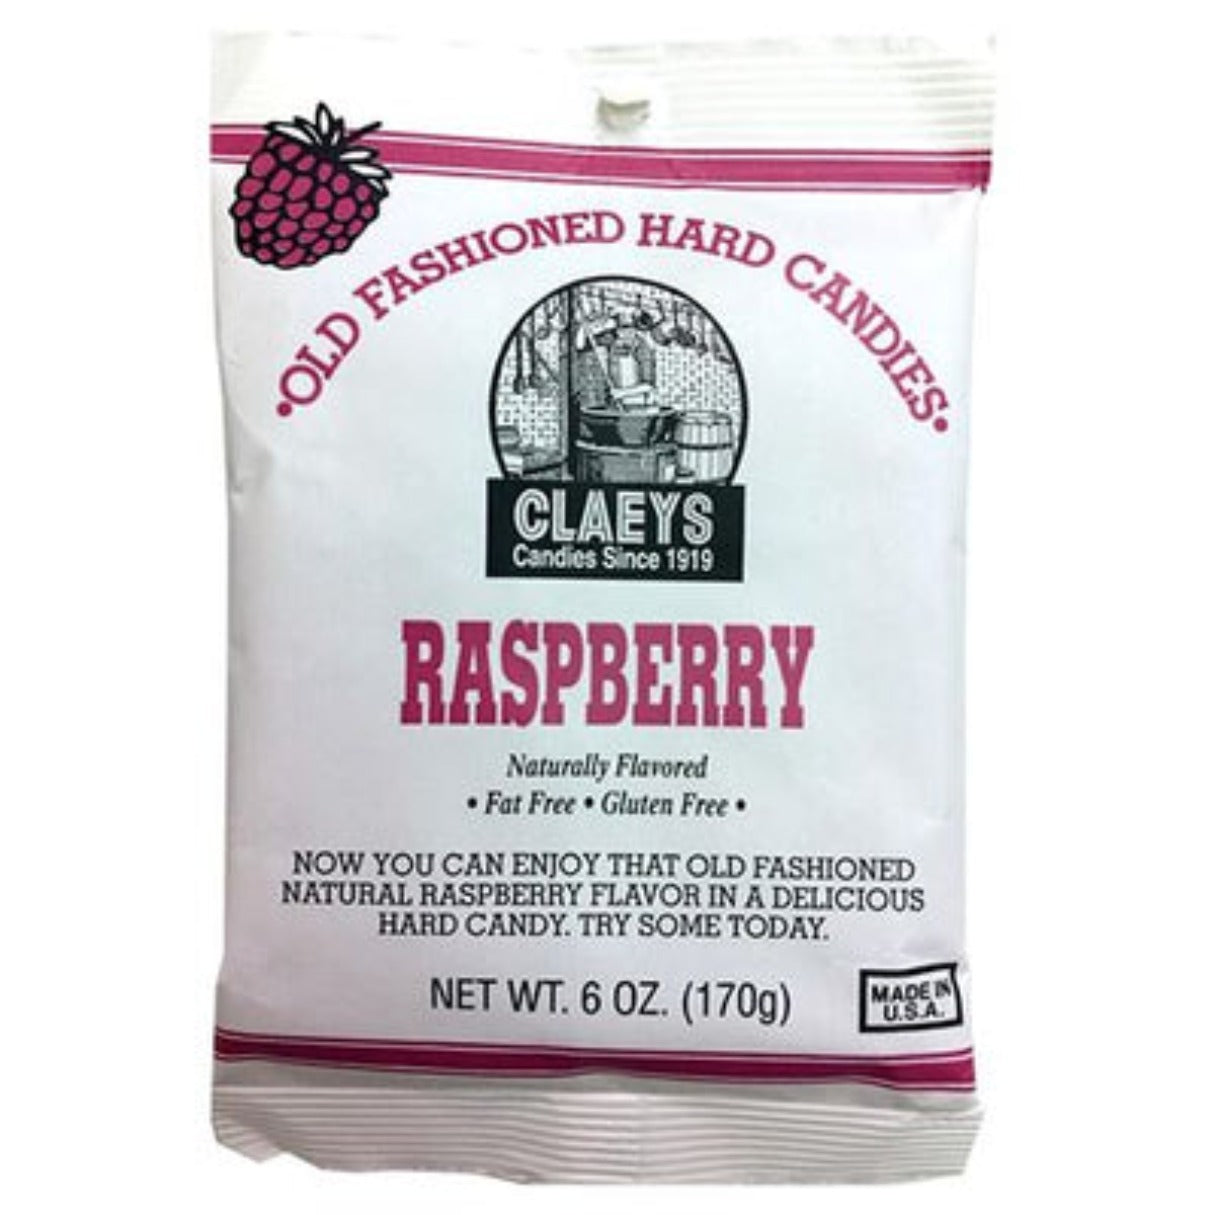 Claey's Natural Raspberry Old Fashion Hard Candies 6oz - 24ct